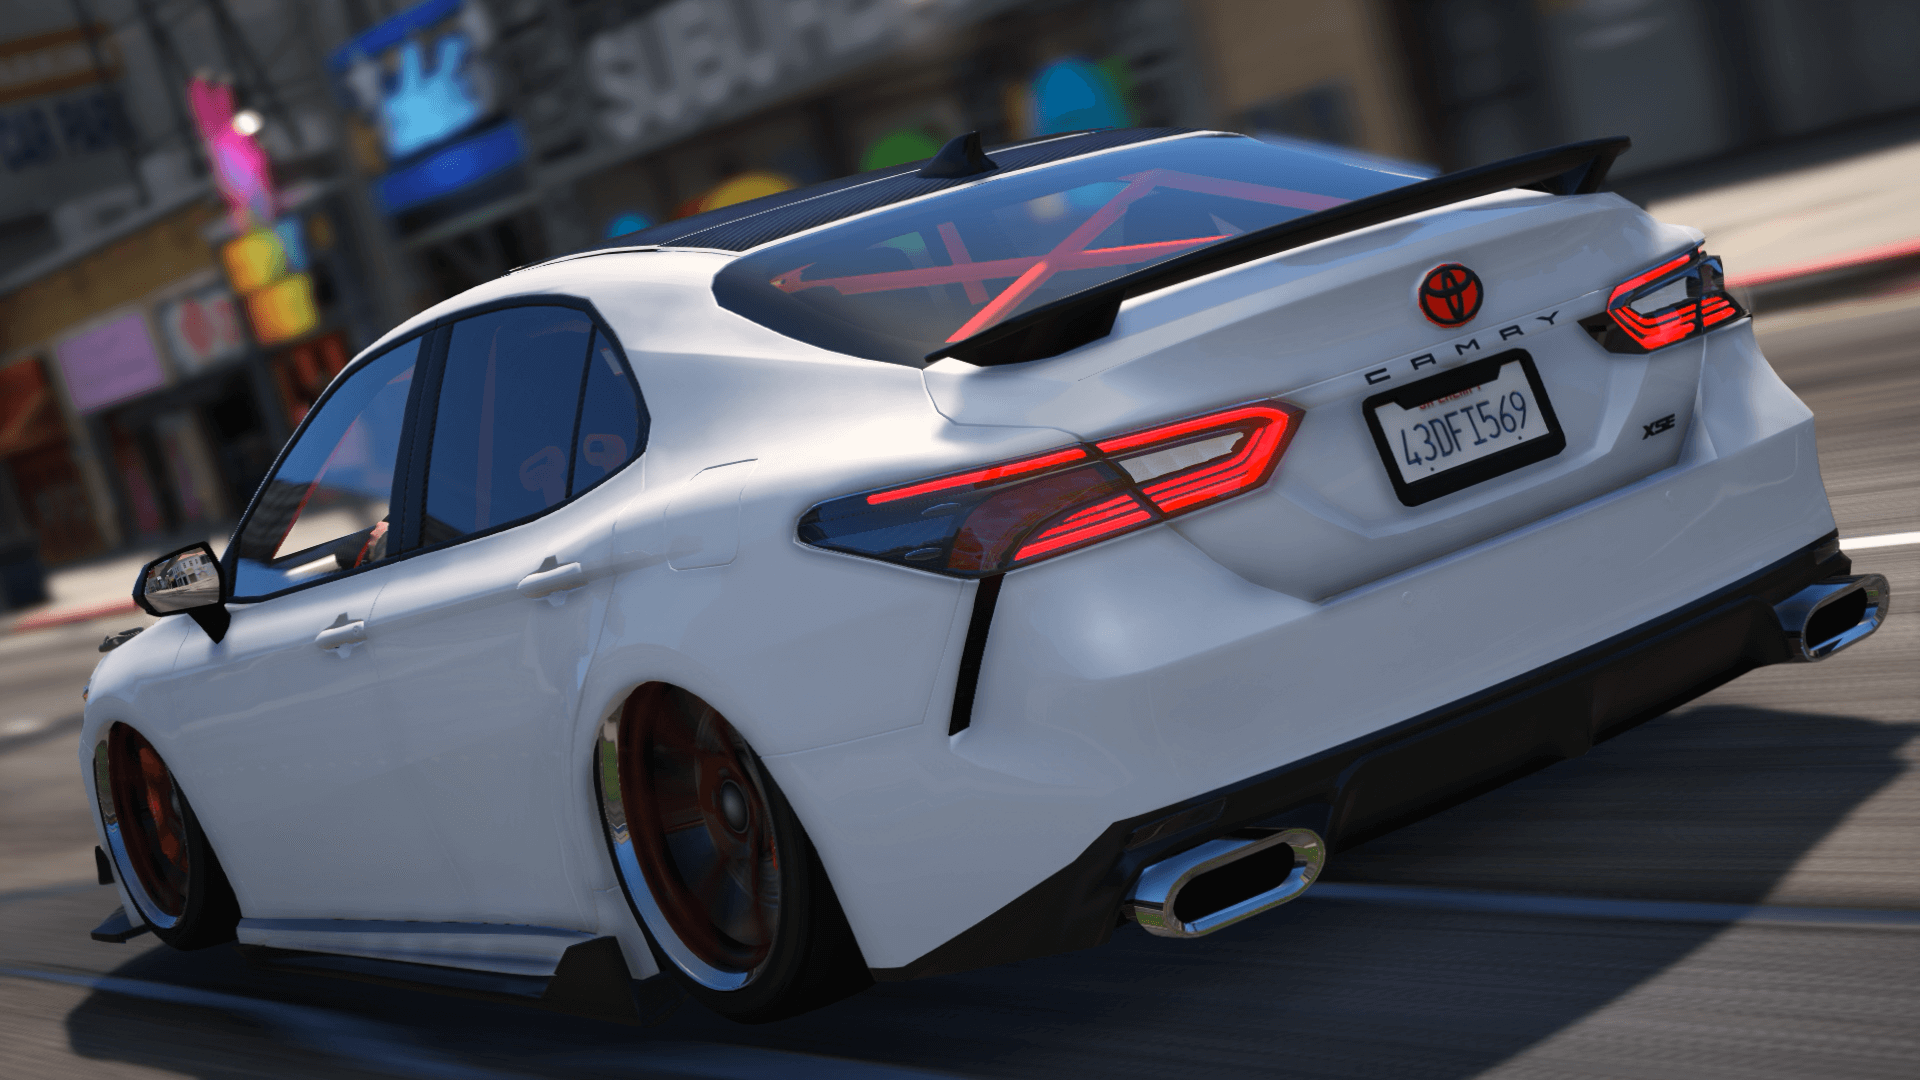 Toyota Camry XSE 2018 Crazy exterior [Add-On | Tuning] - GTA5-Mods.com